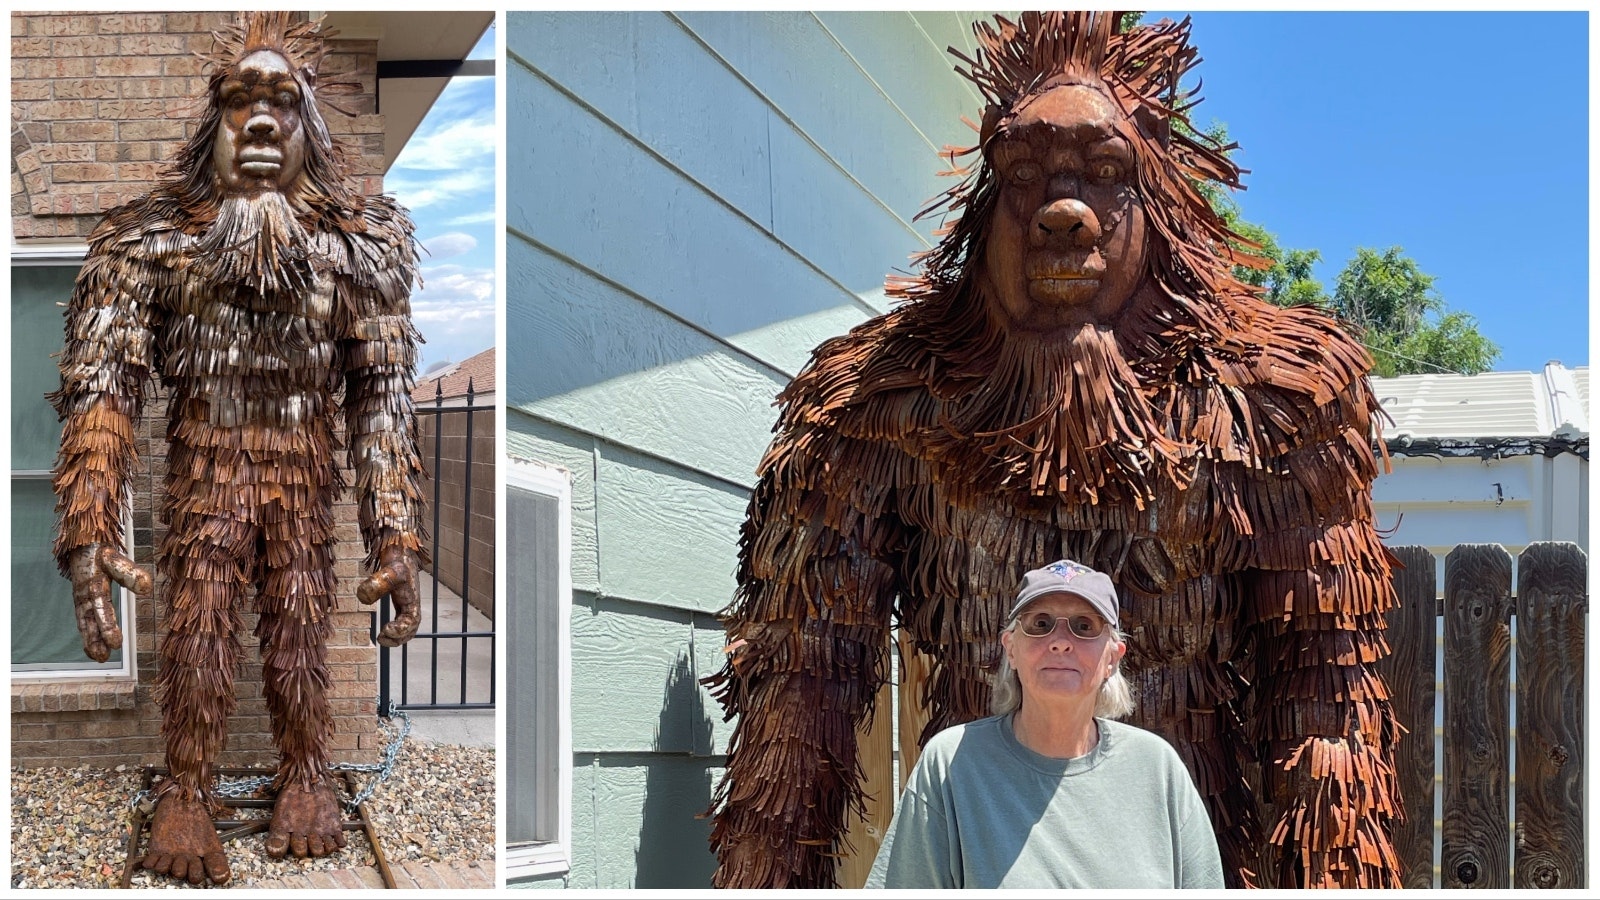 A giant 10-foot-tall, 350-pound sasquatch sculpture is hard to miss in Sue and Frank Kelley's yard in Douglas, Wyoming.